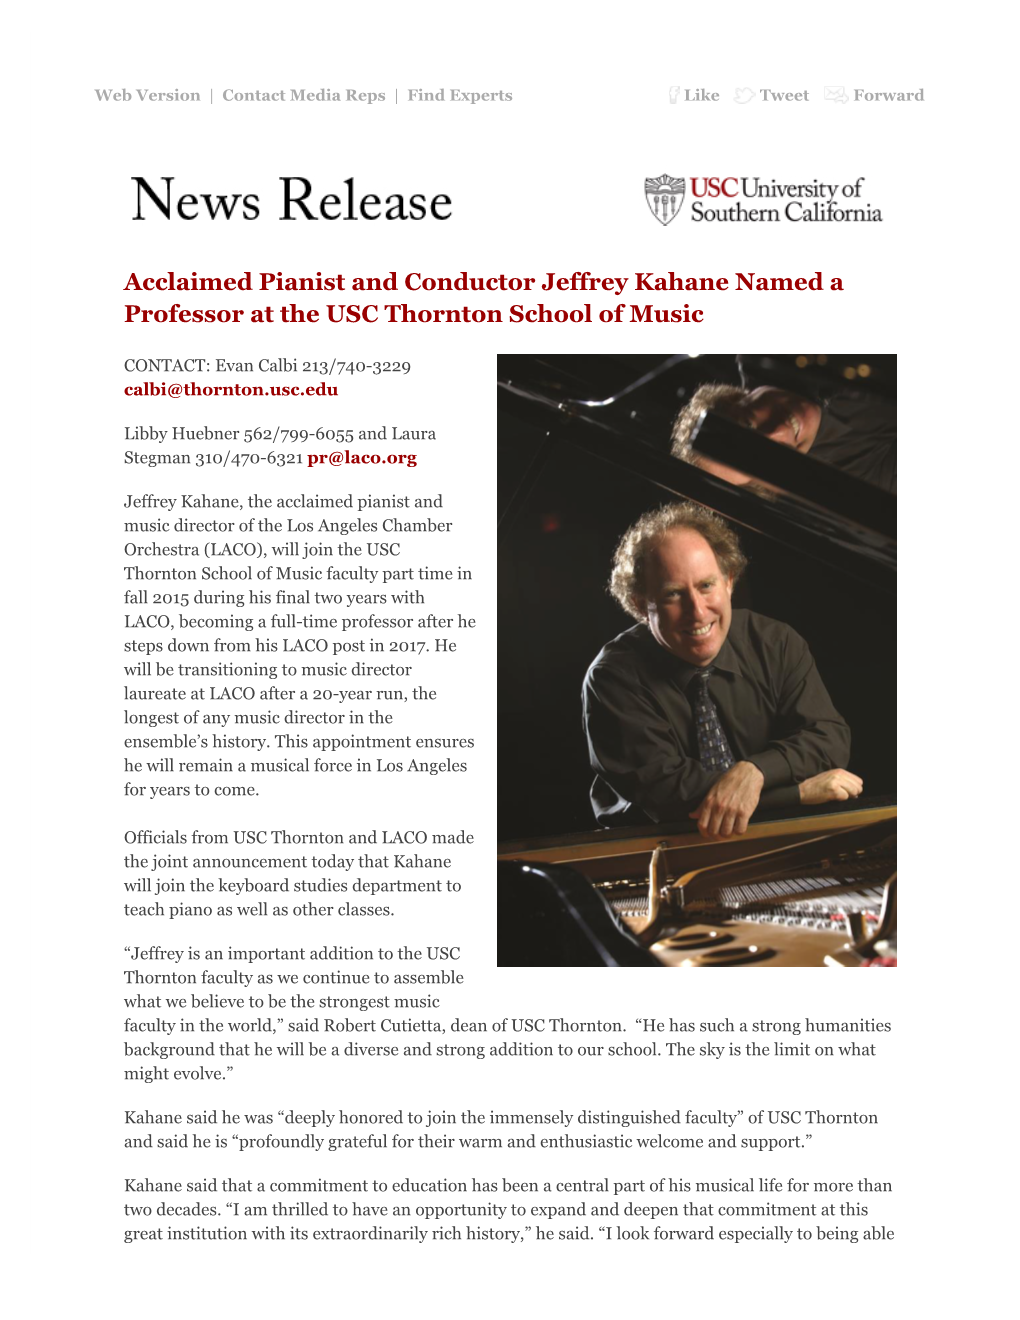 Acclaimed Pianist and Conductor Jeffrey Kahane Named a Professor at the USC Thornton School of Music